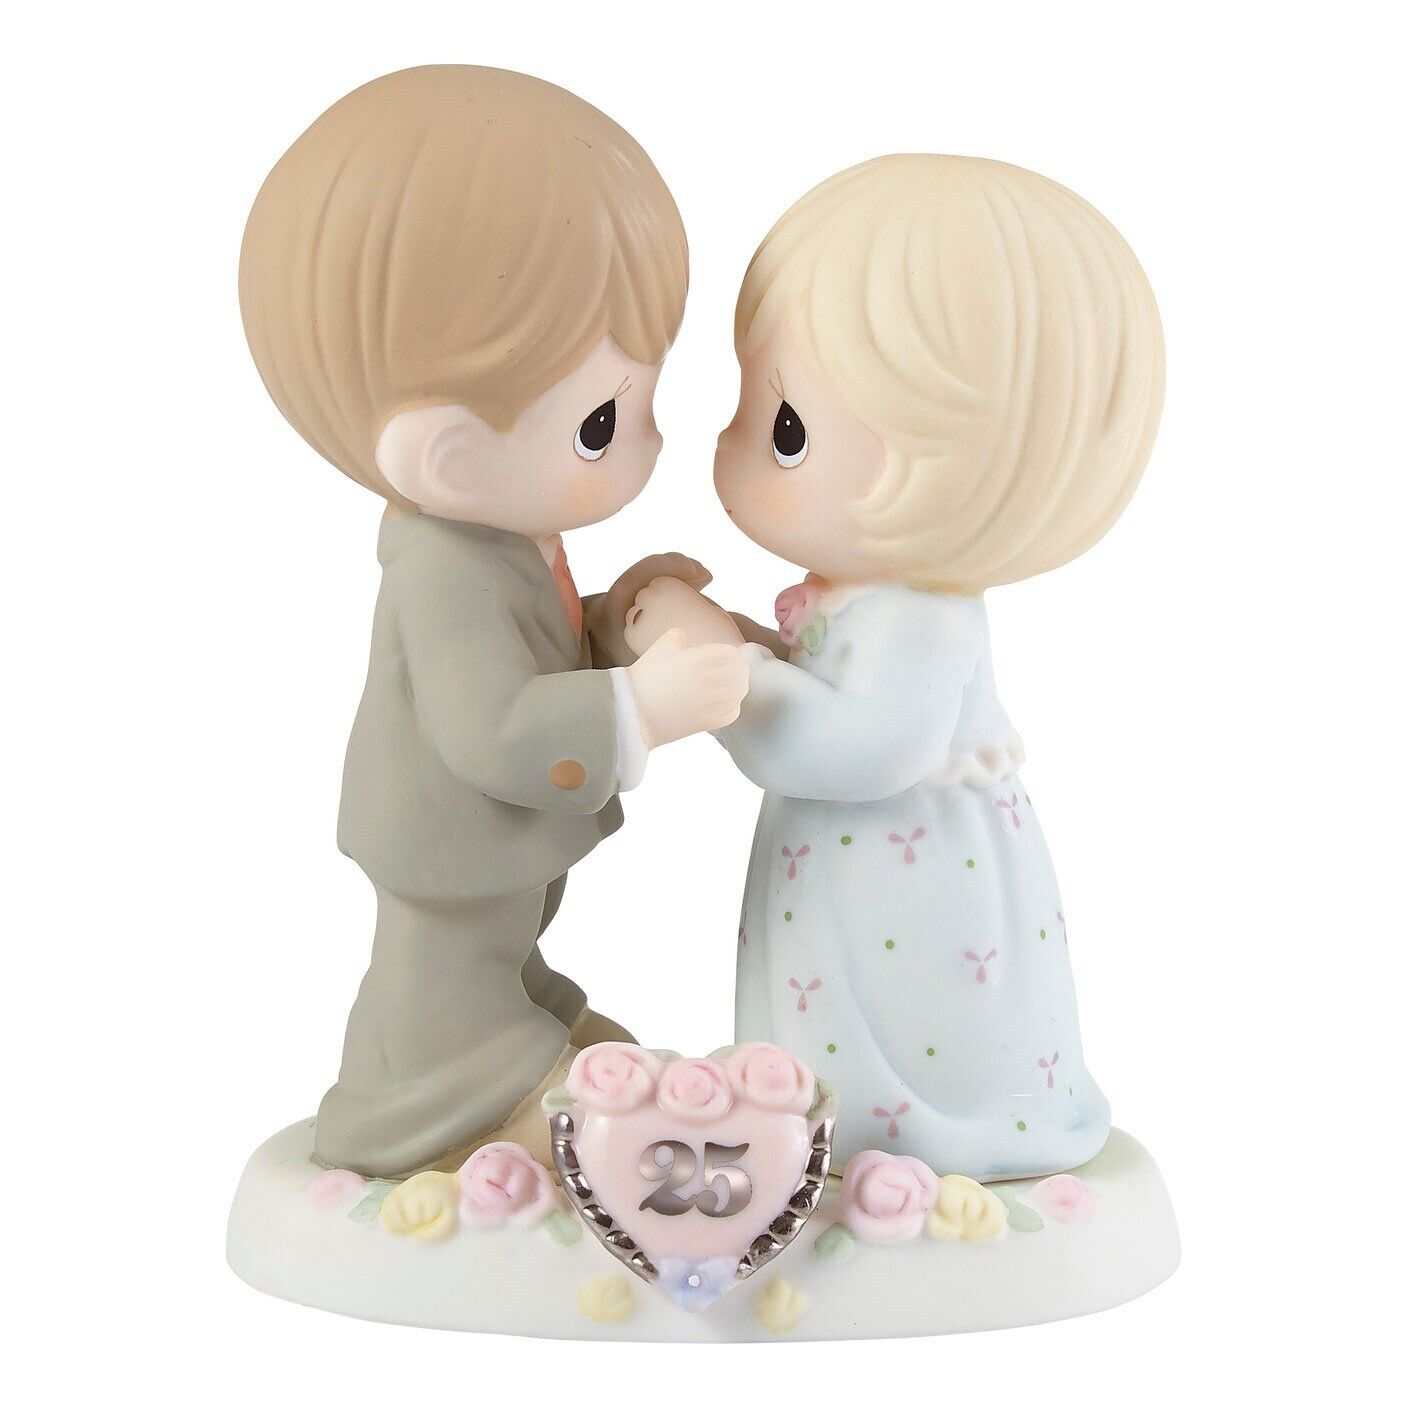 Precious Moments Figurine 25th Anniversary Our Love Still Sparkles In Your Eyes